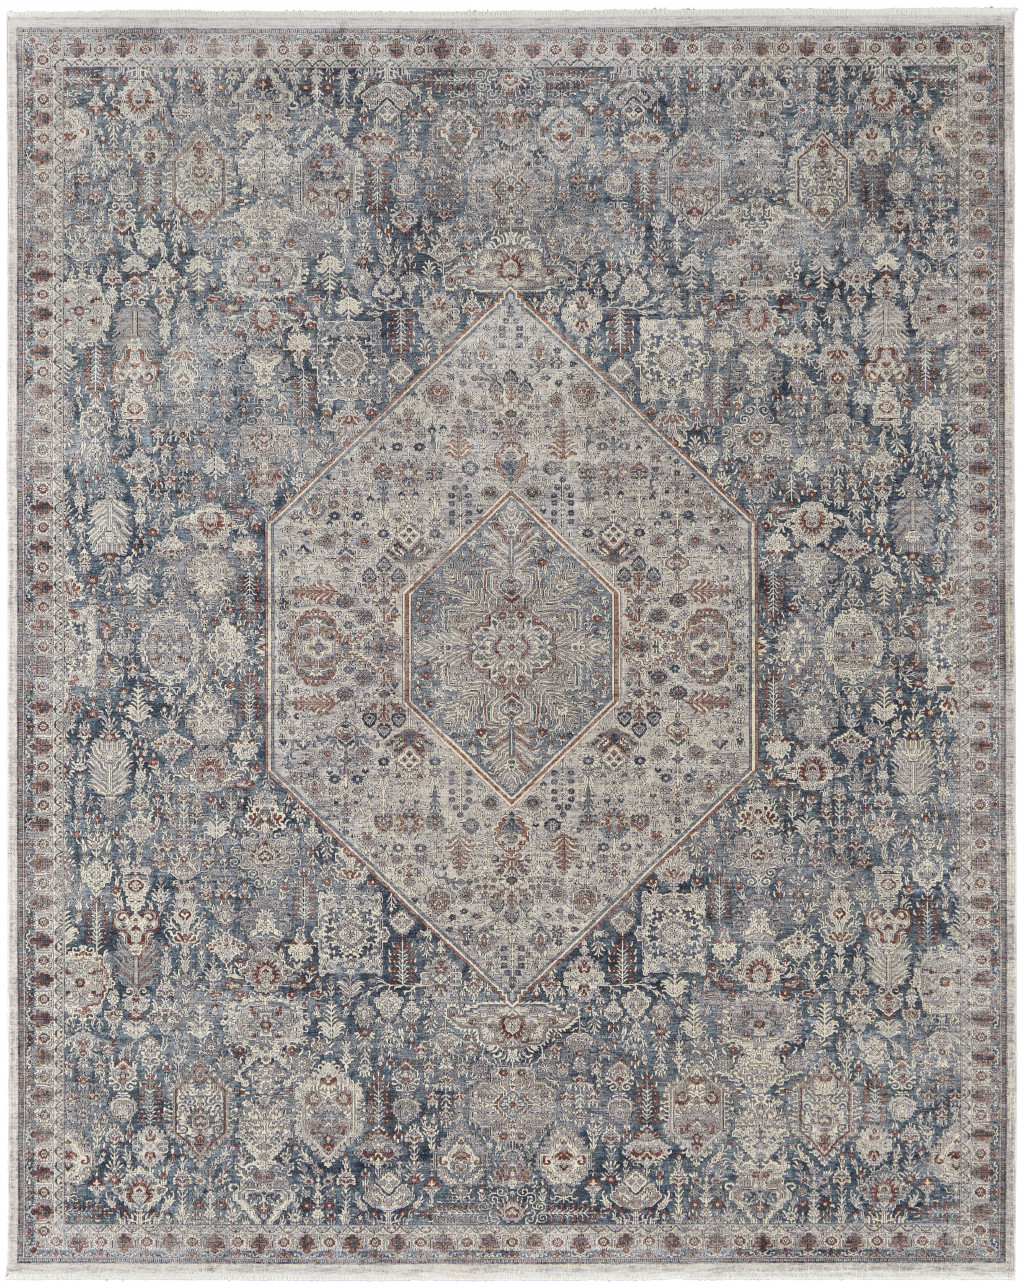 12' X 15' Blue And Ivory Floral Power Loom Stain Resistant Area Rug-514481-1